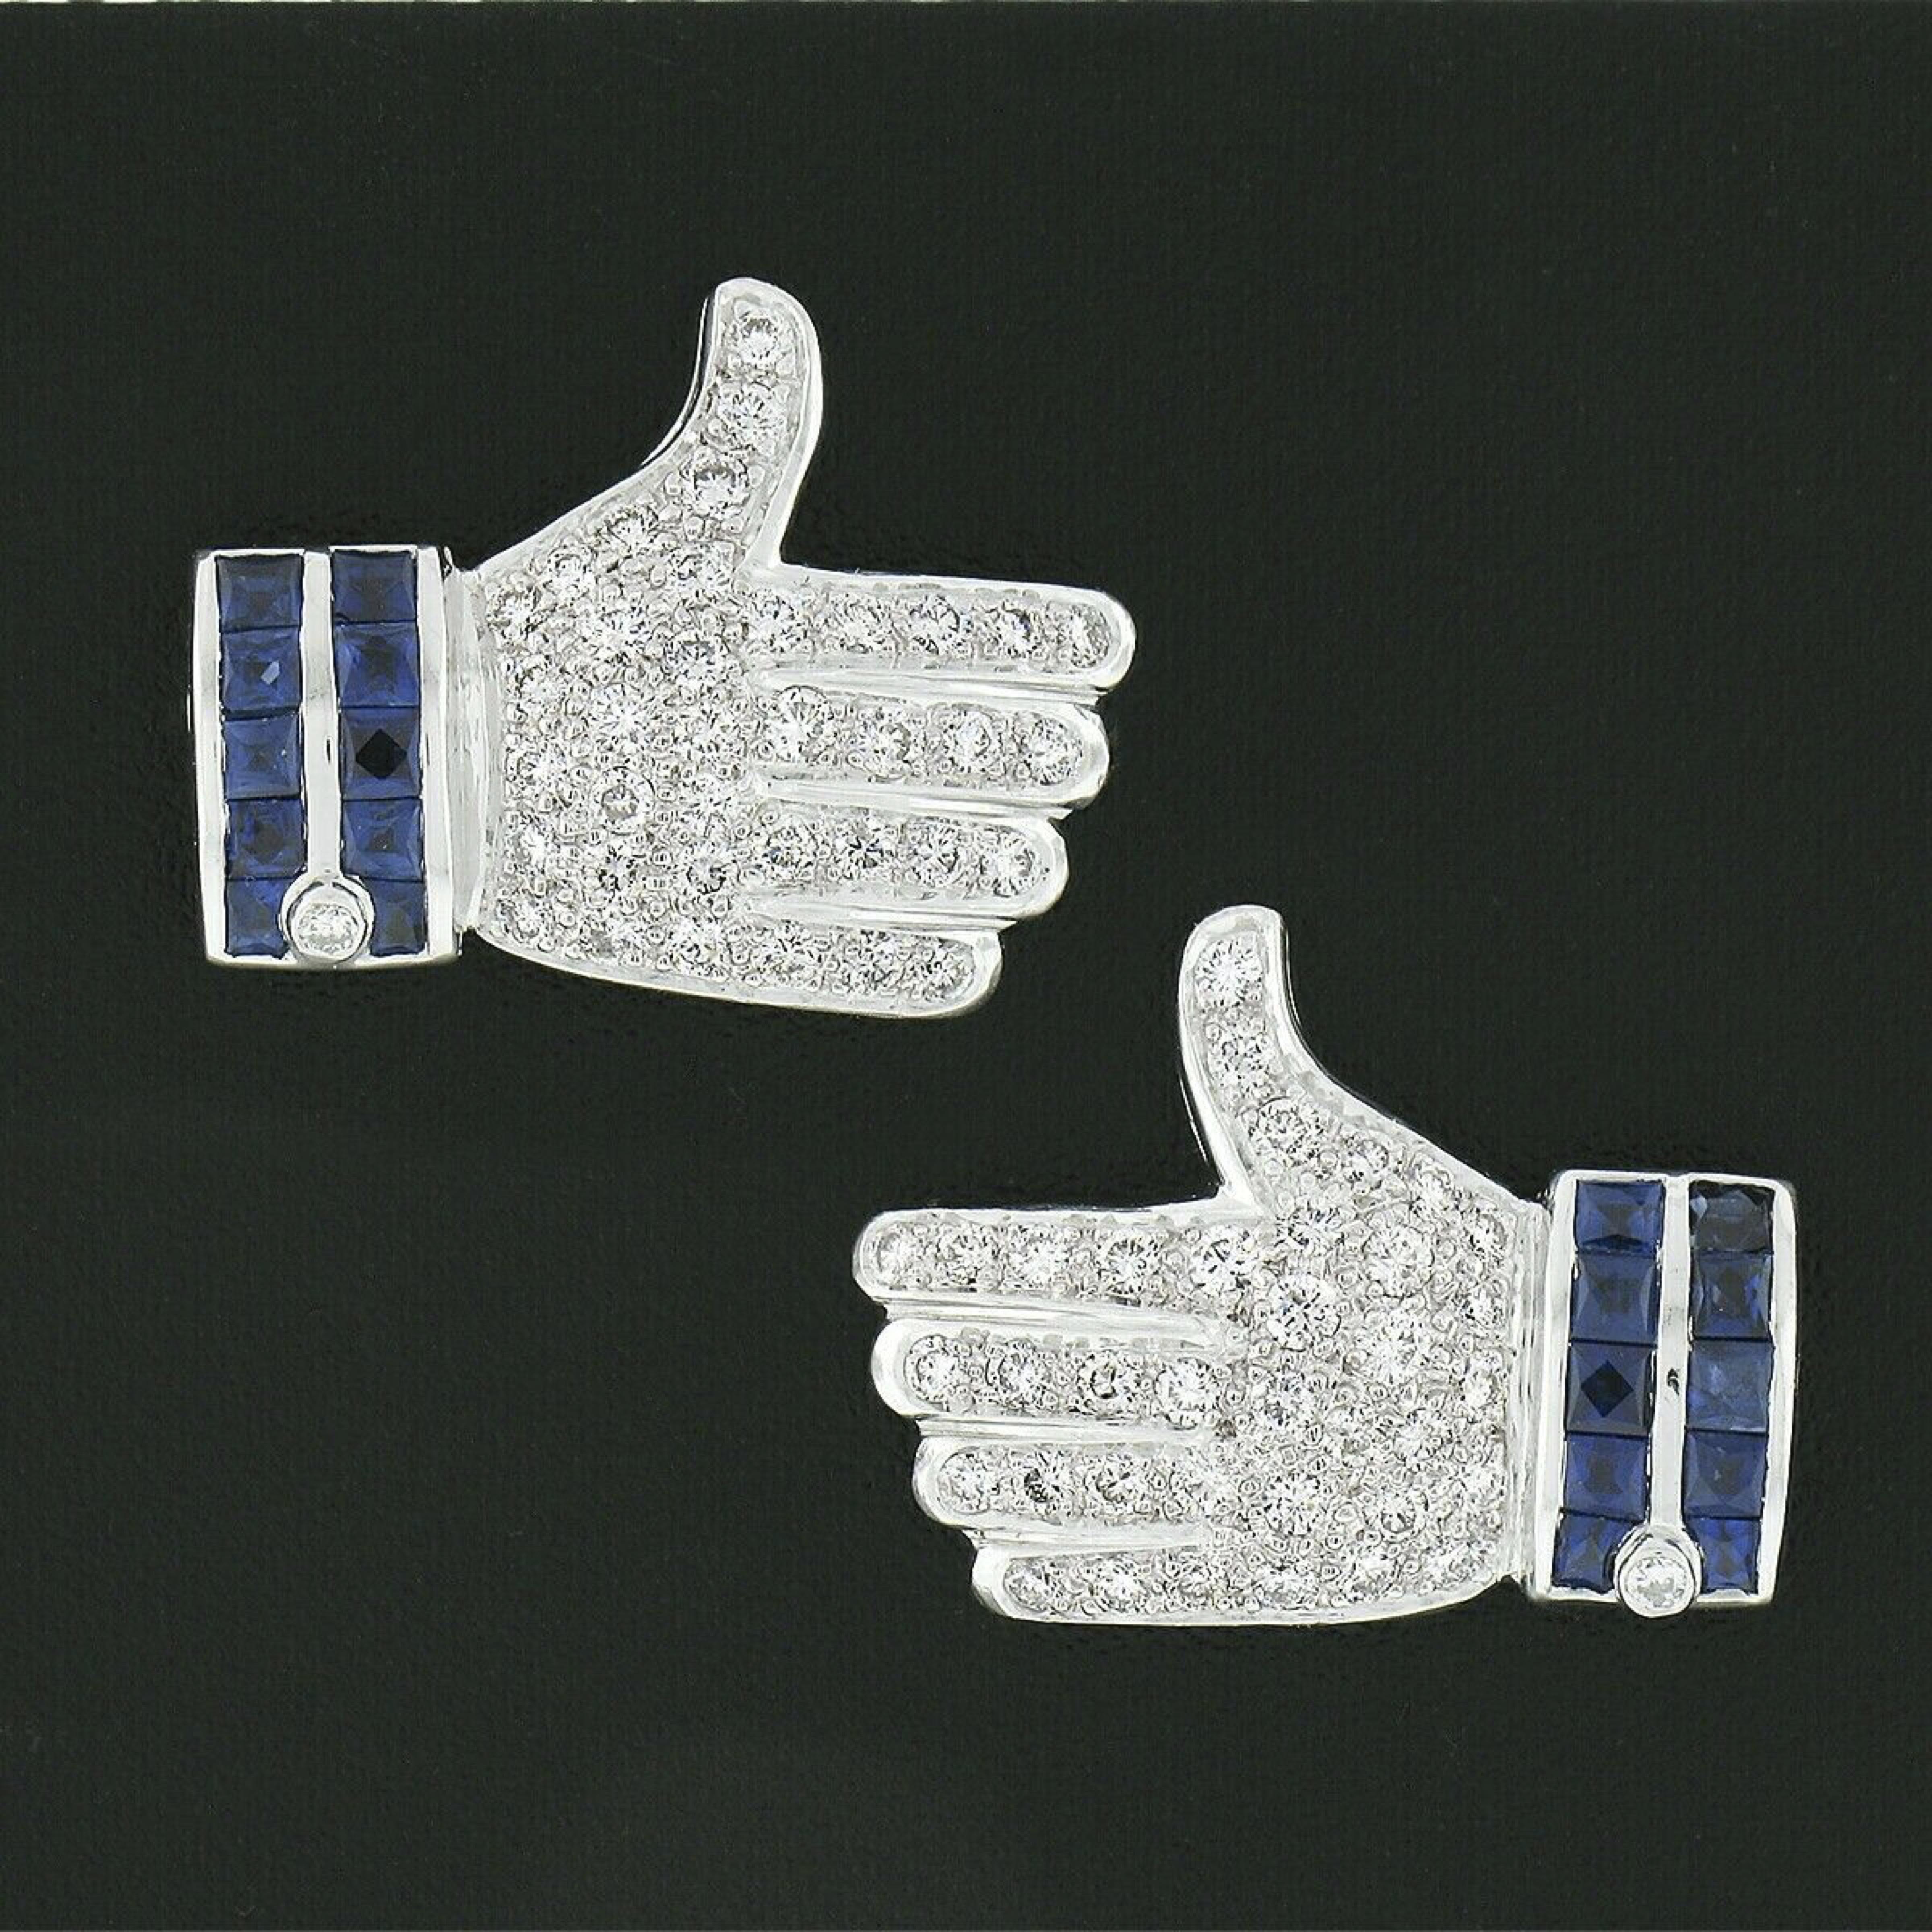 This super fun pair of earrings are very well crafted in solid 18k &14k white gold and feature a thumbs up or 